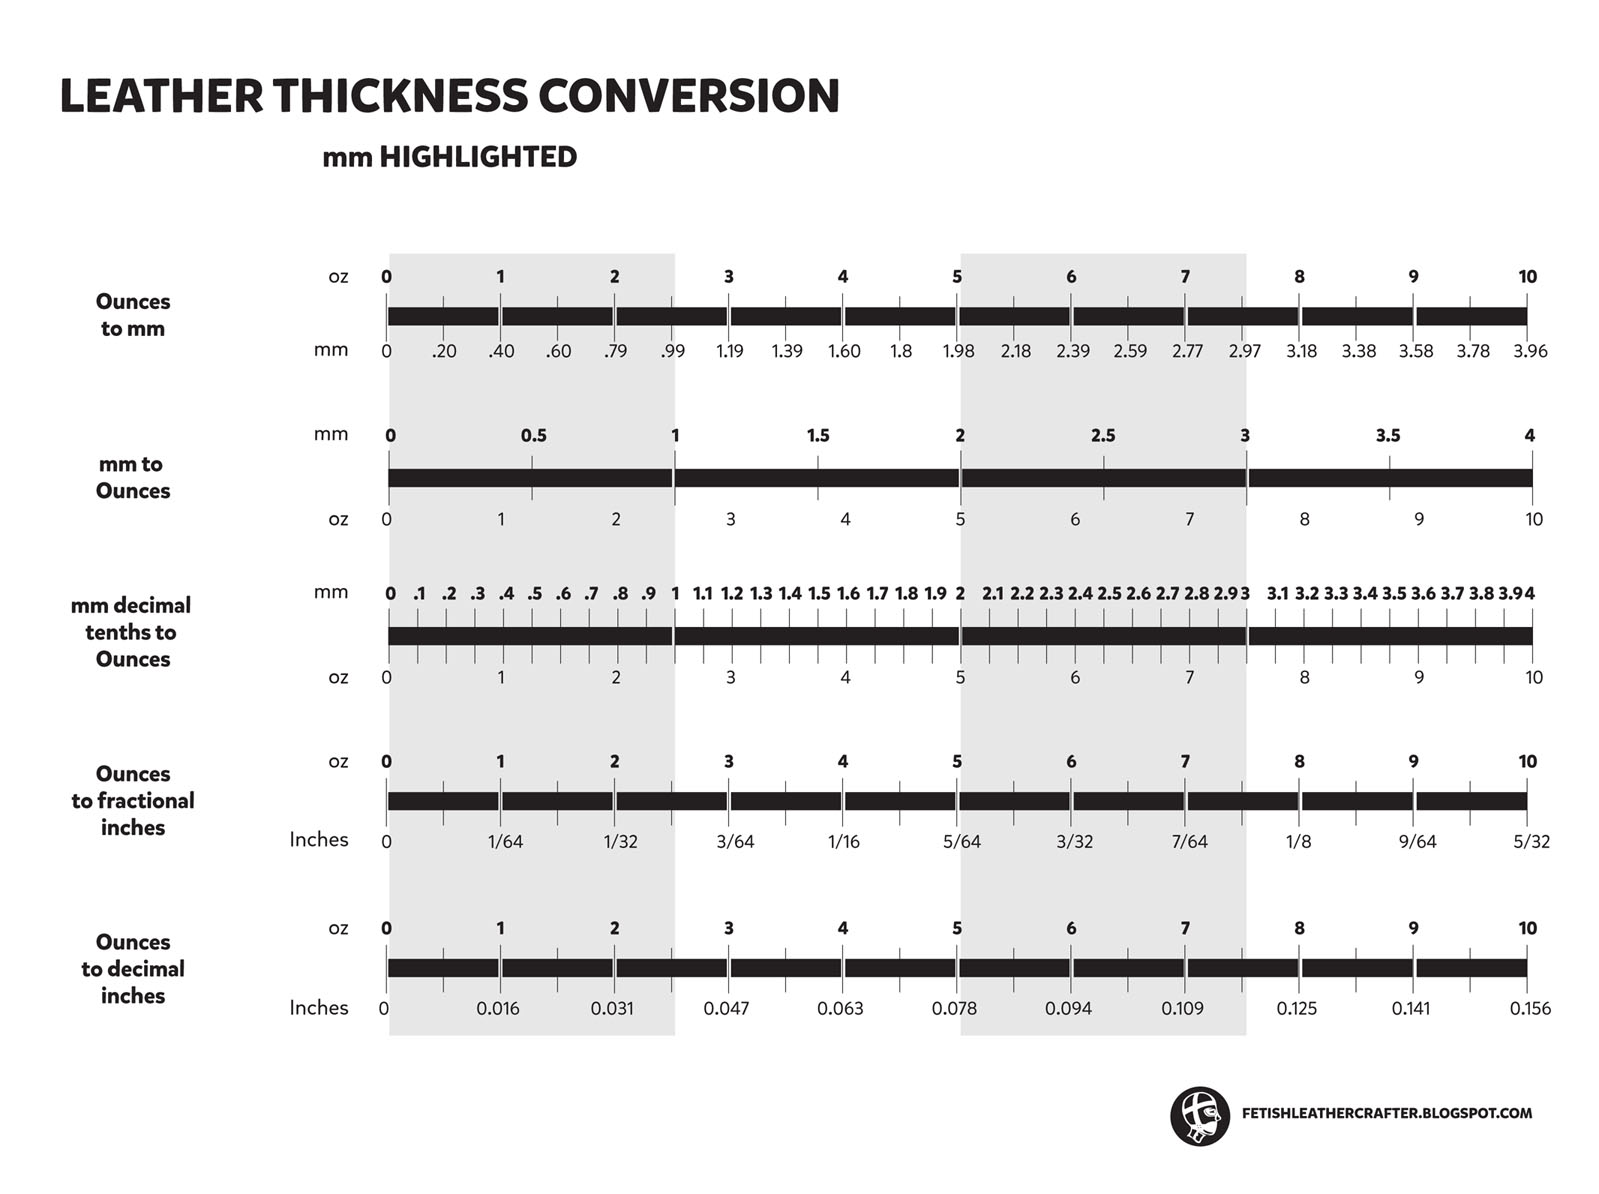 a-fetish-leathercrafters-journal-leather-thickness-conversion-charts